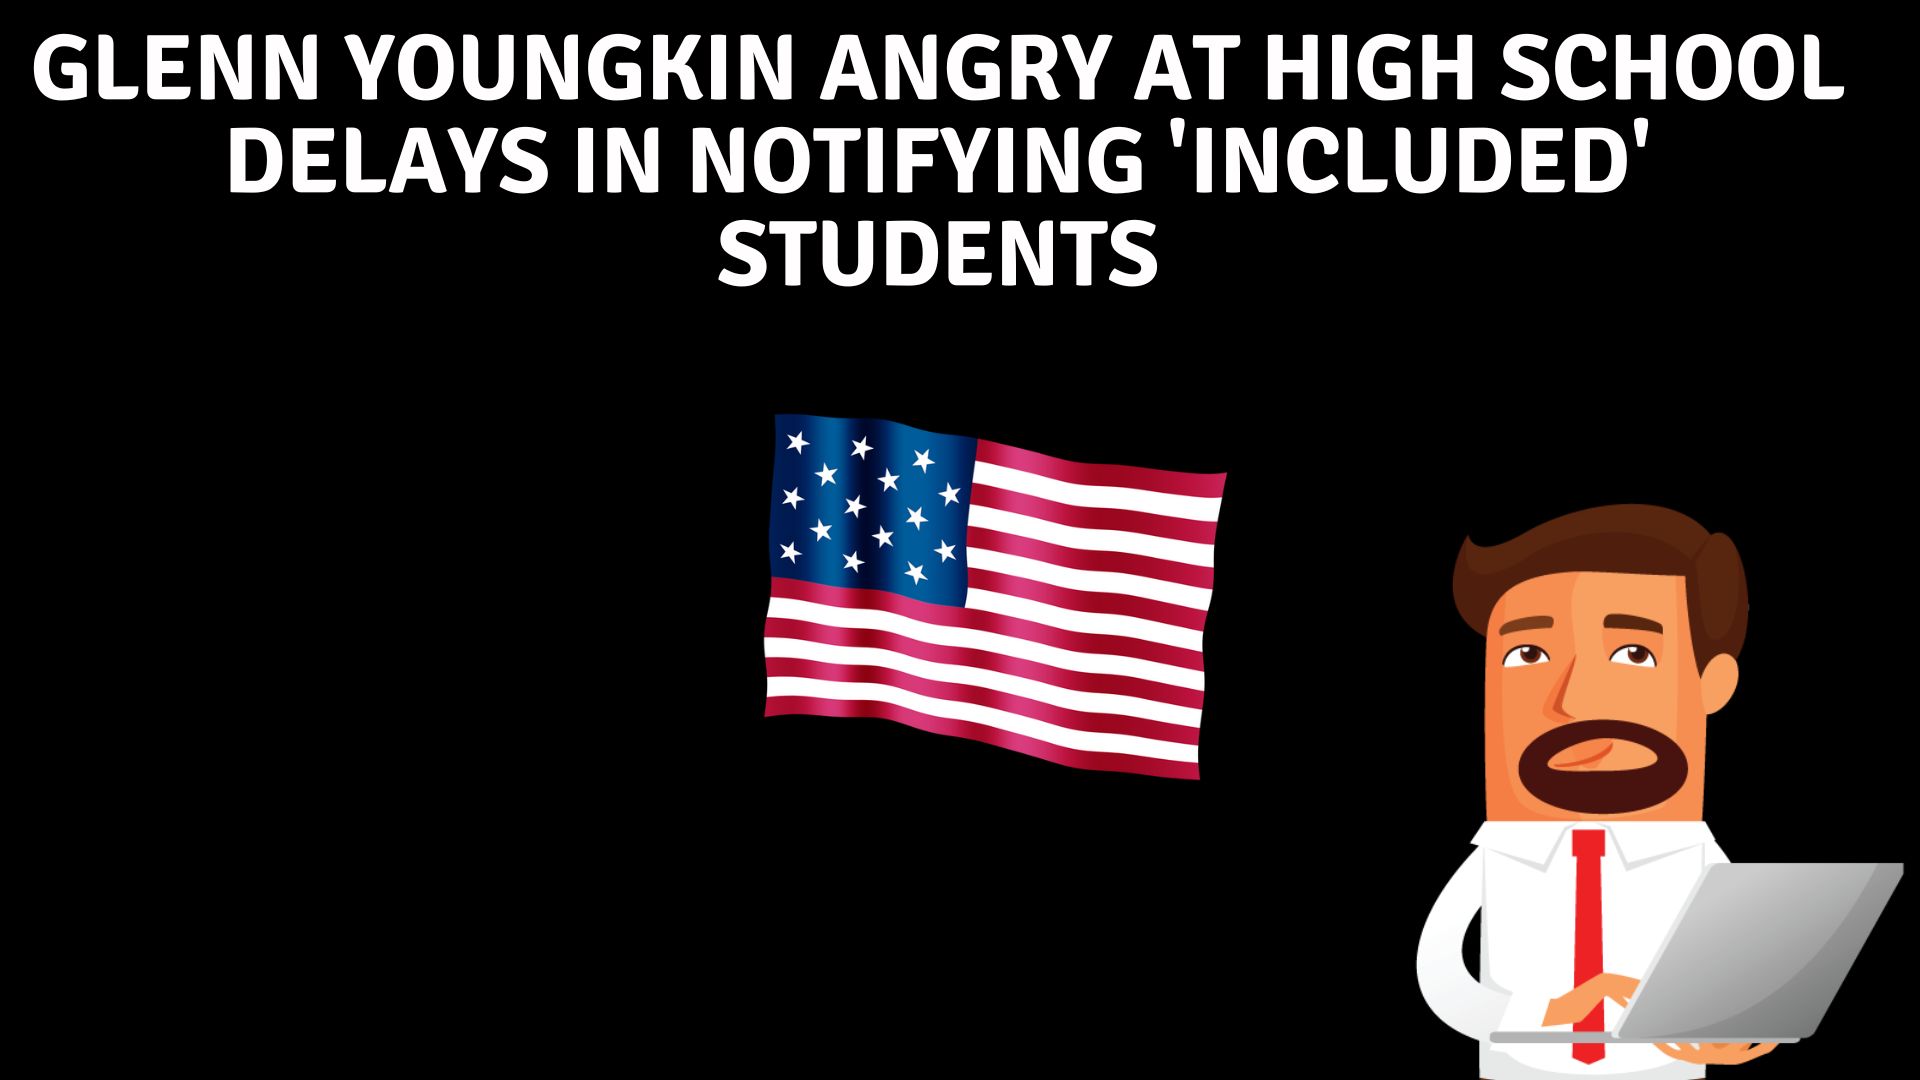 Glenn youngkin angry at high school delays in notifying 'included' students